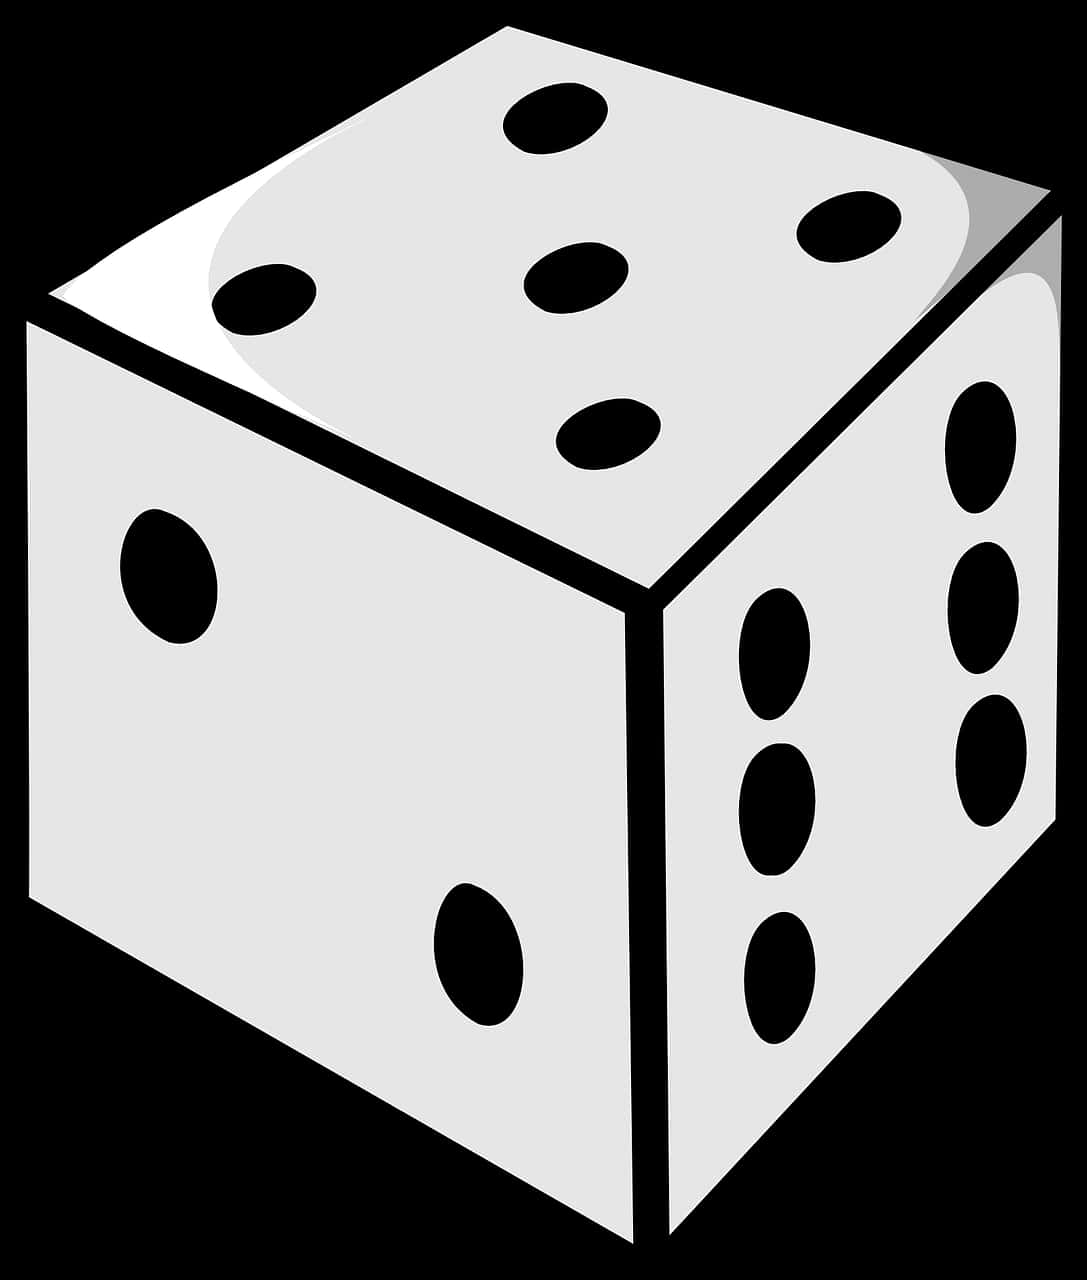 A White Dice With Black Dots